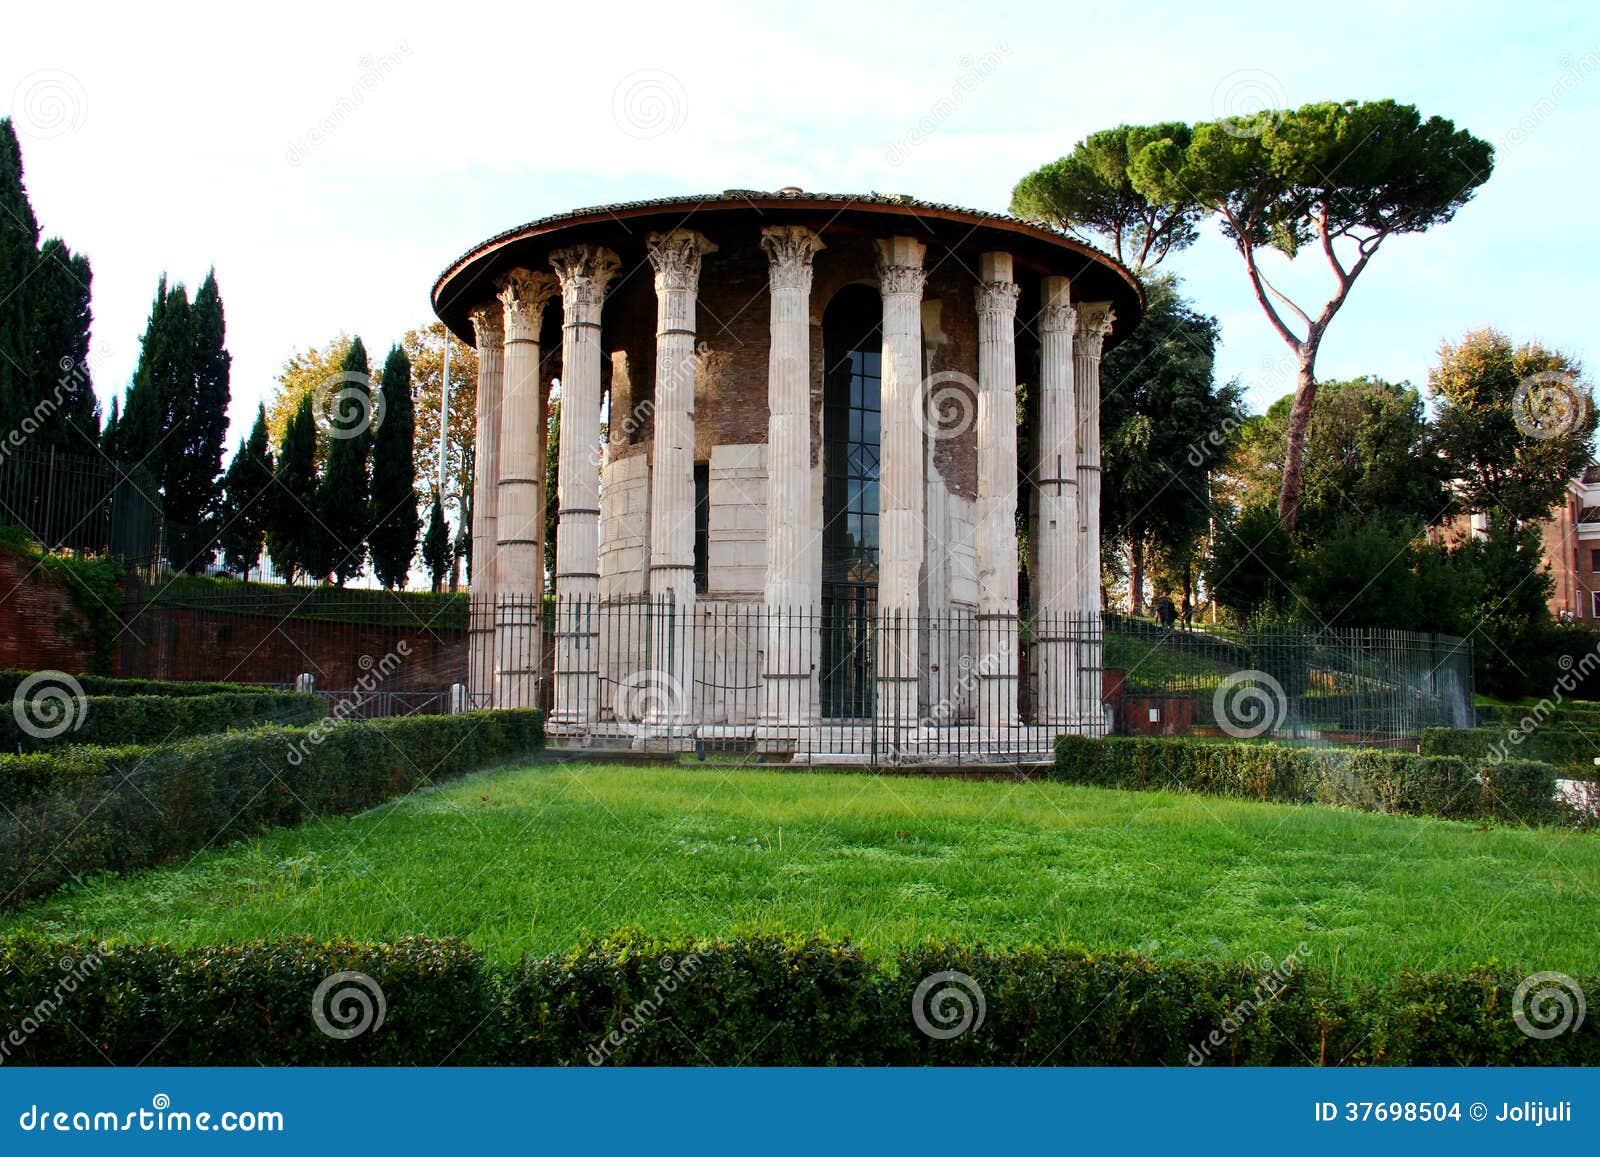 the temple of hercules victor, rome